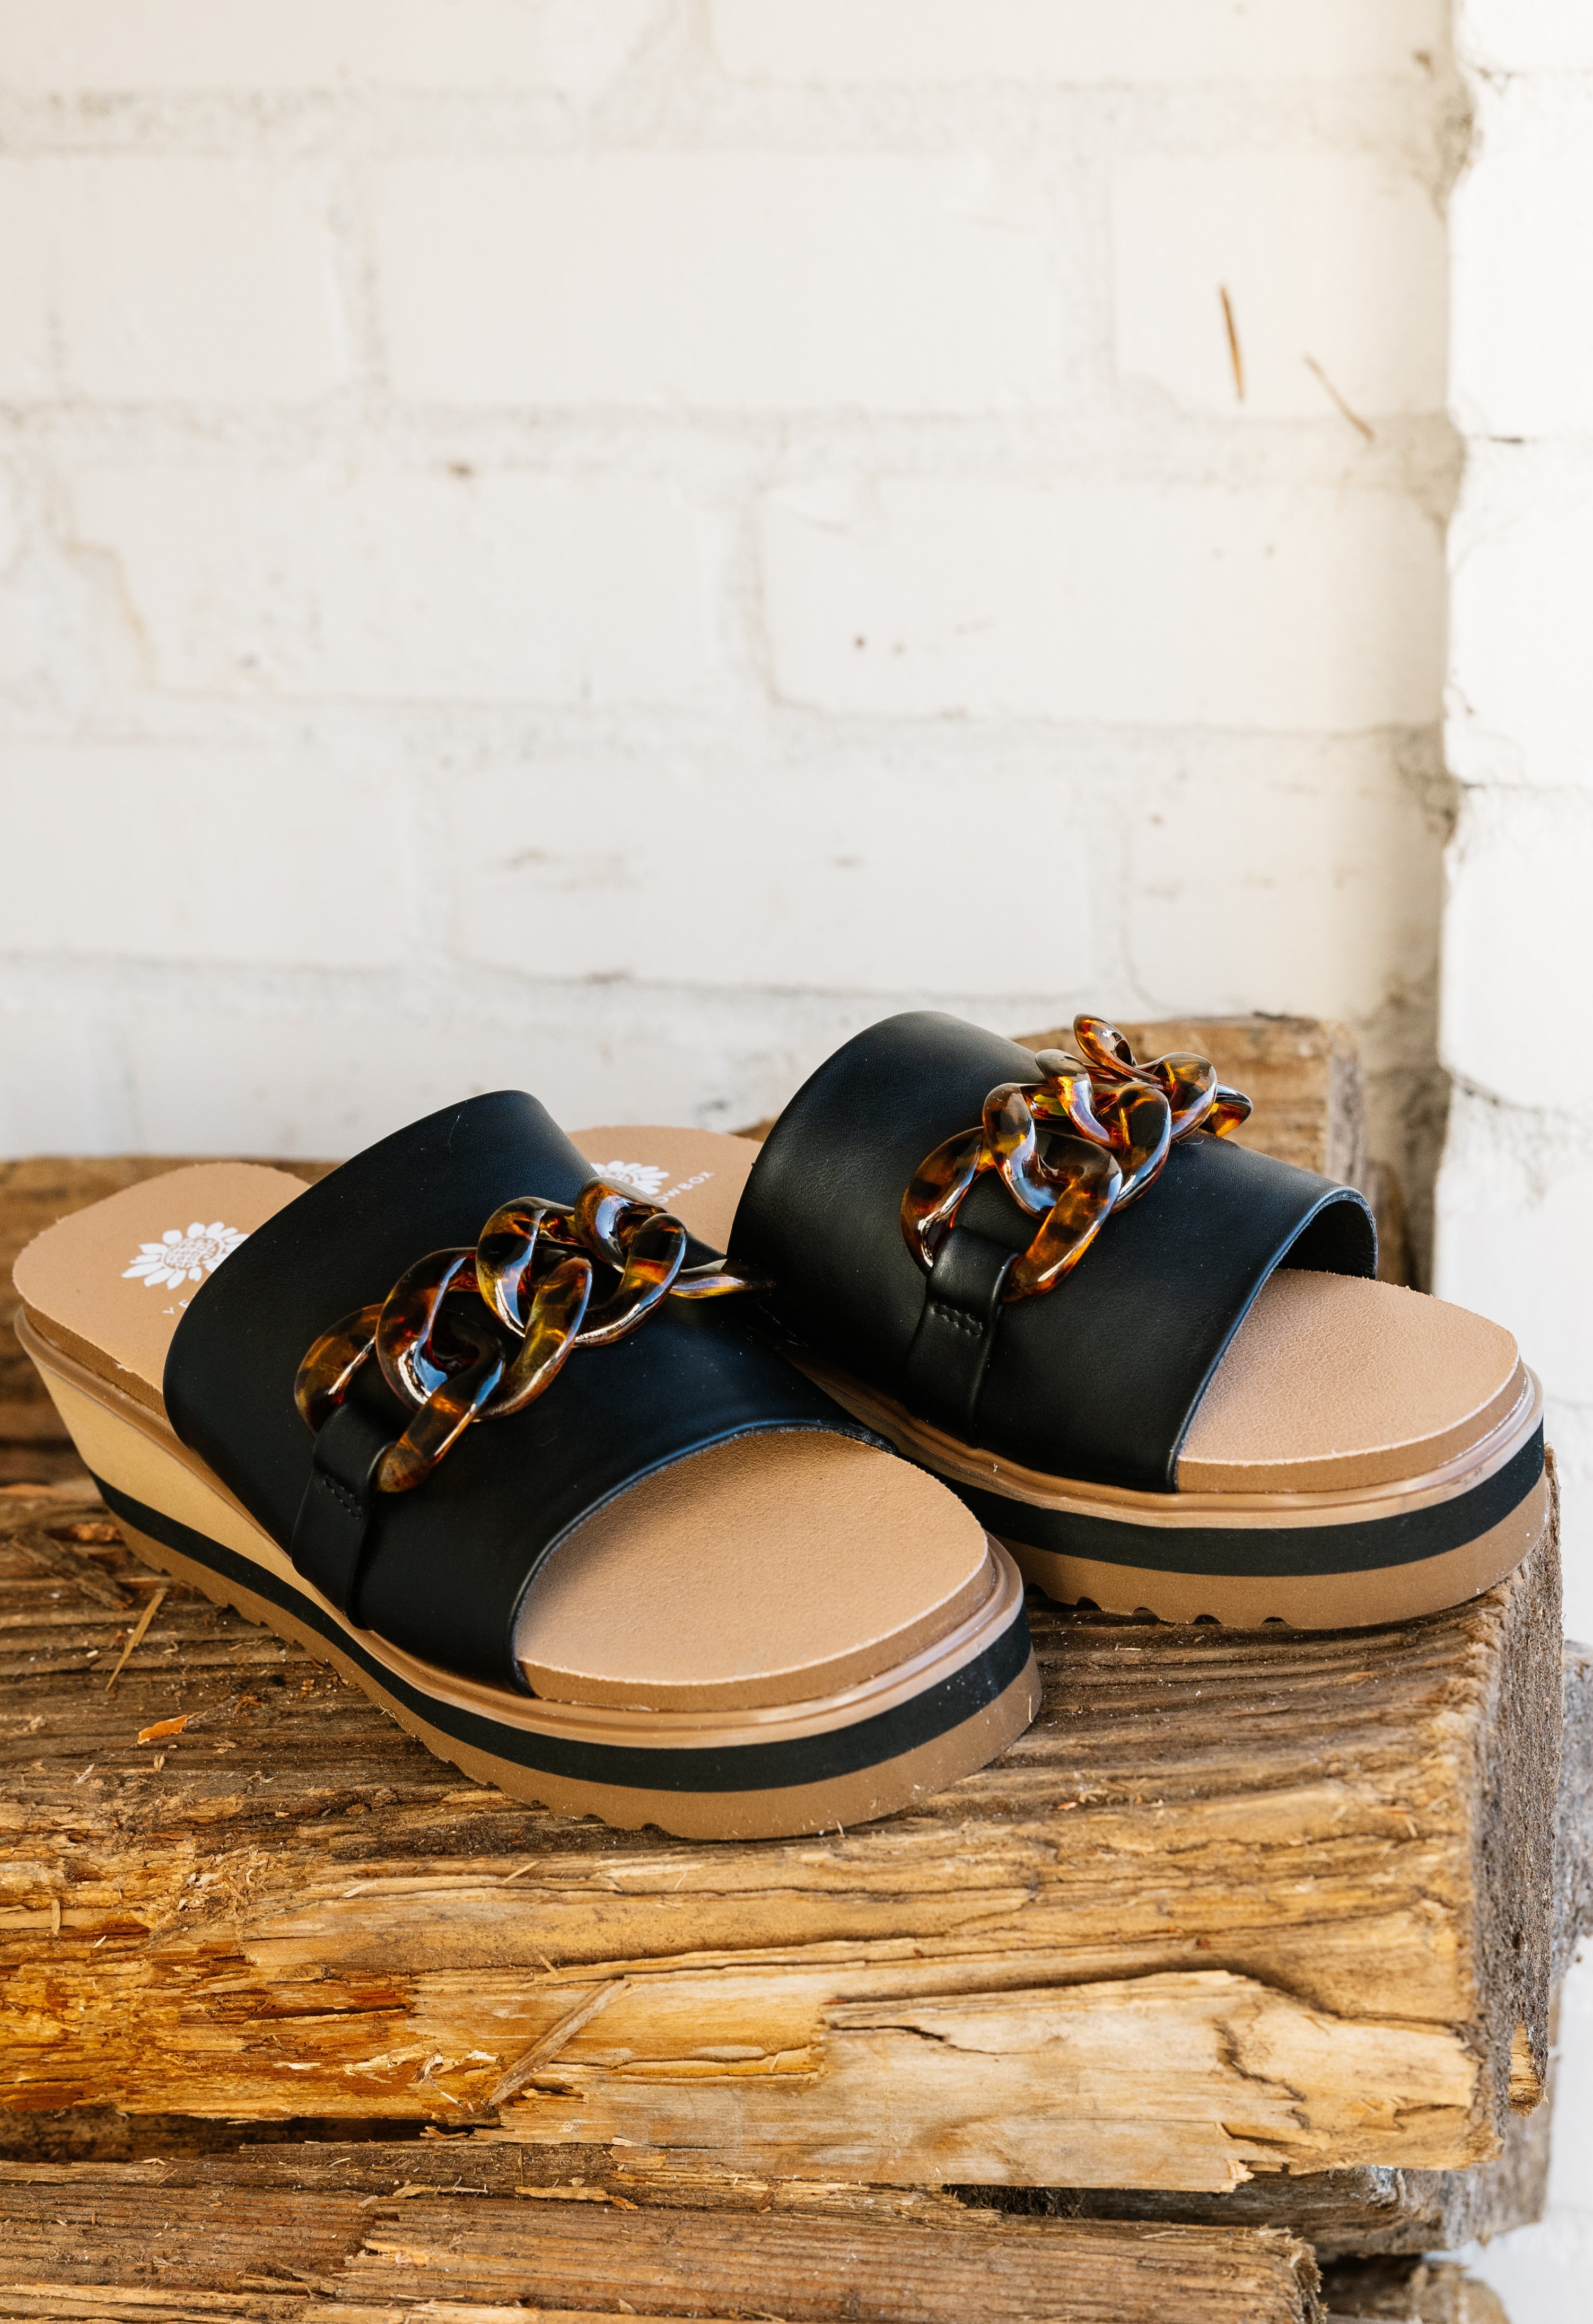 Alora Sandals - BLACK - willows clothing Sandals